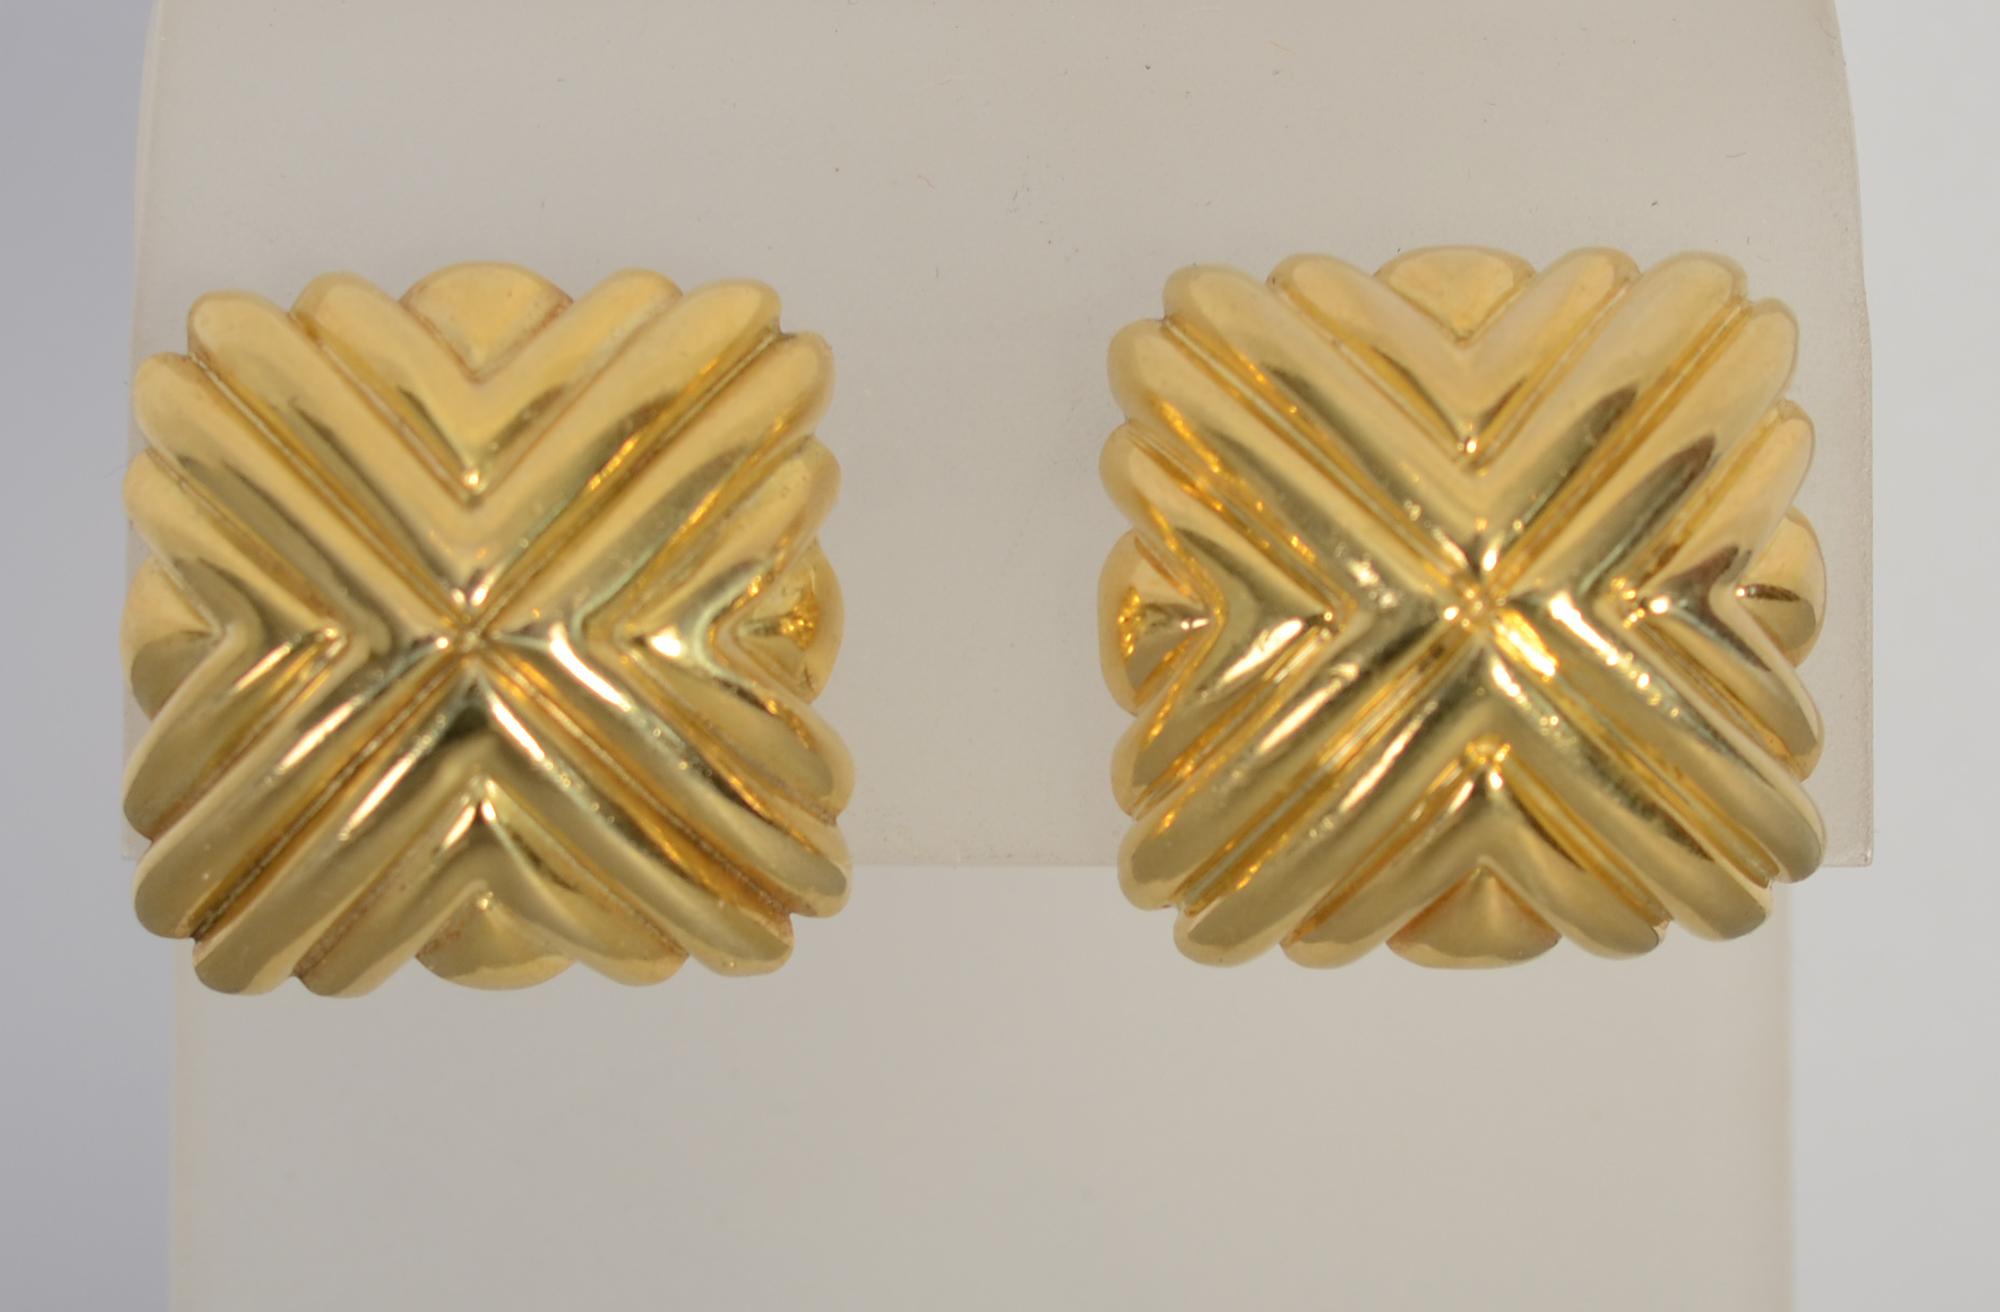 These 18 karat gold Cartier earrings are the perfect pair to wear all day - everywhere.
They are 13/16